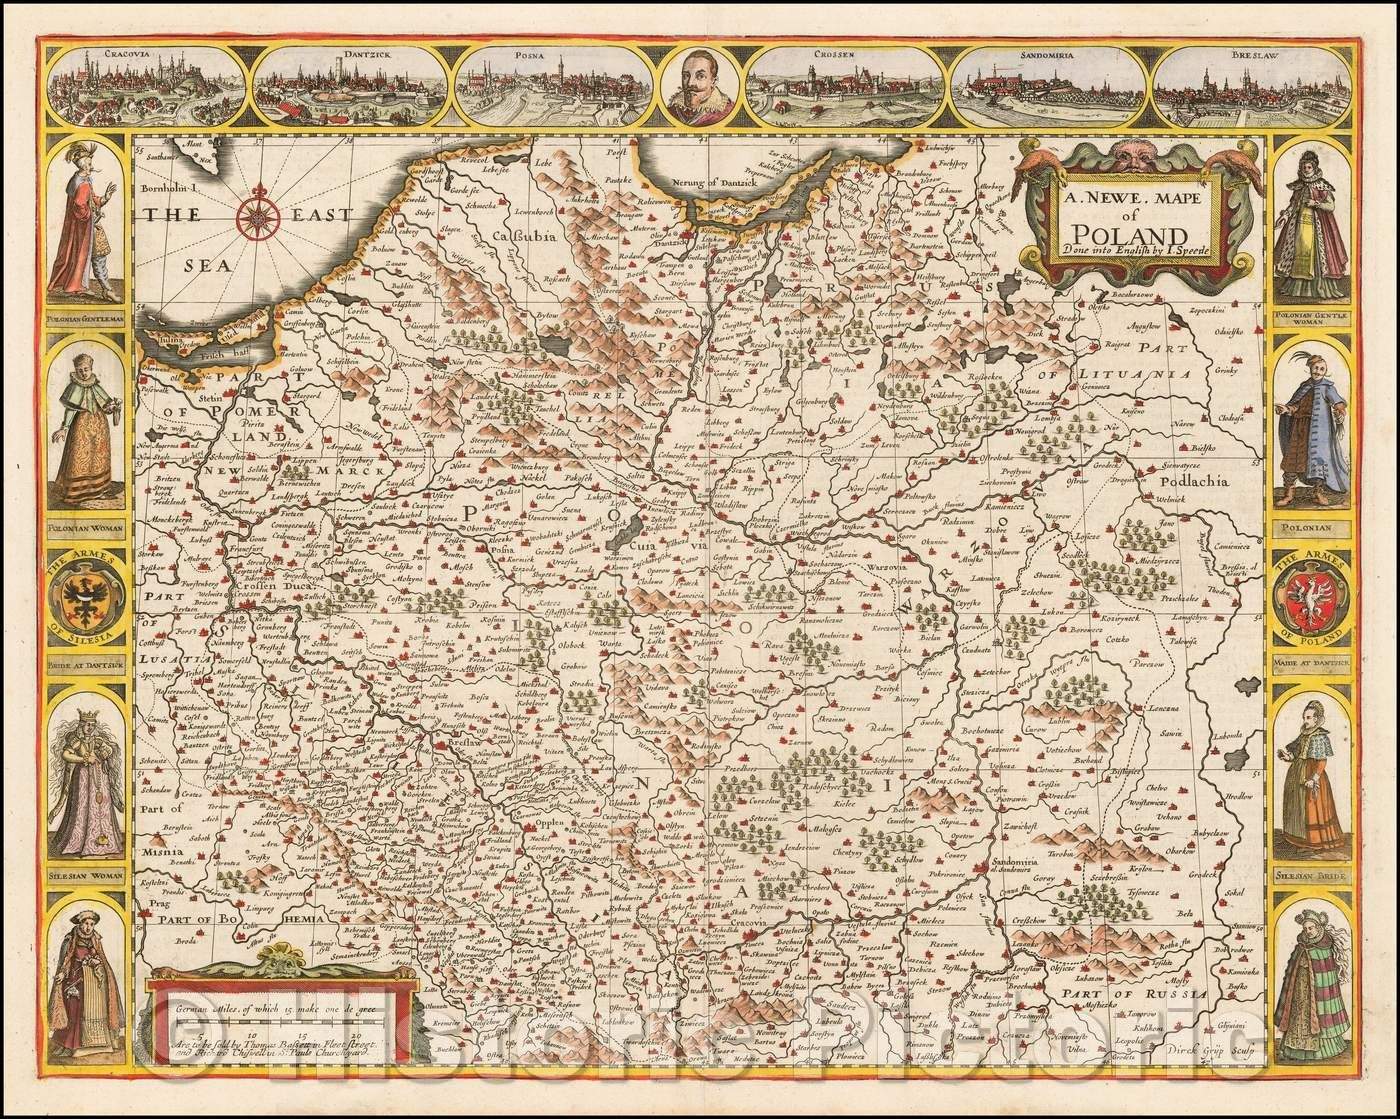 Historic Map - A Newe Mape of Poland Done into English, 1676, John Speed v3